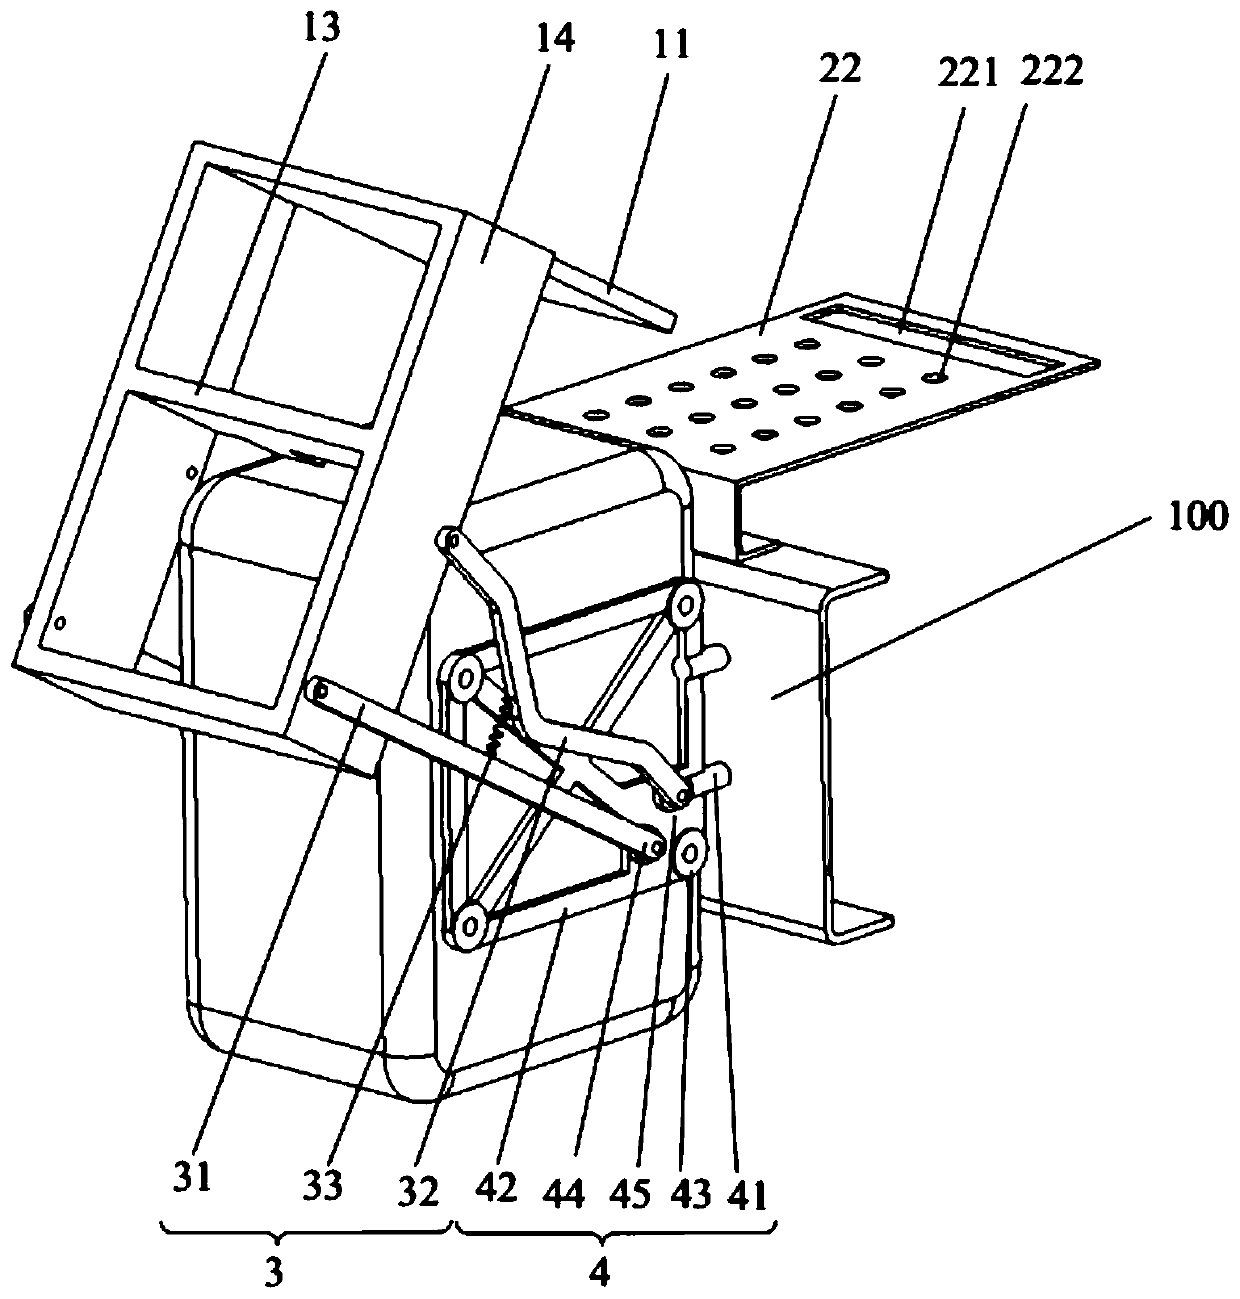 Pedaling ladder device and vehicle thereof